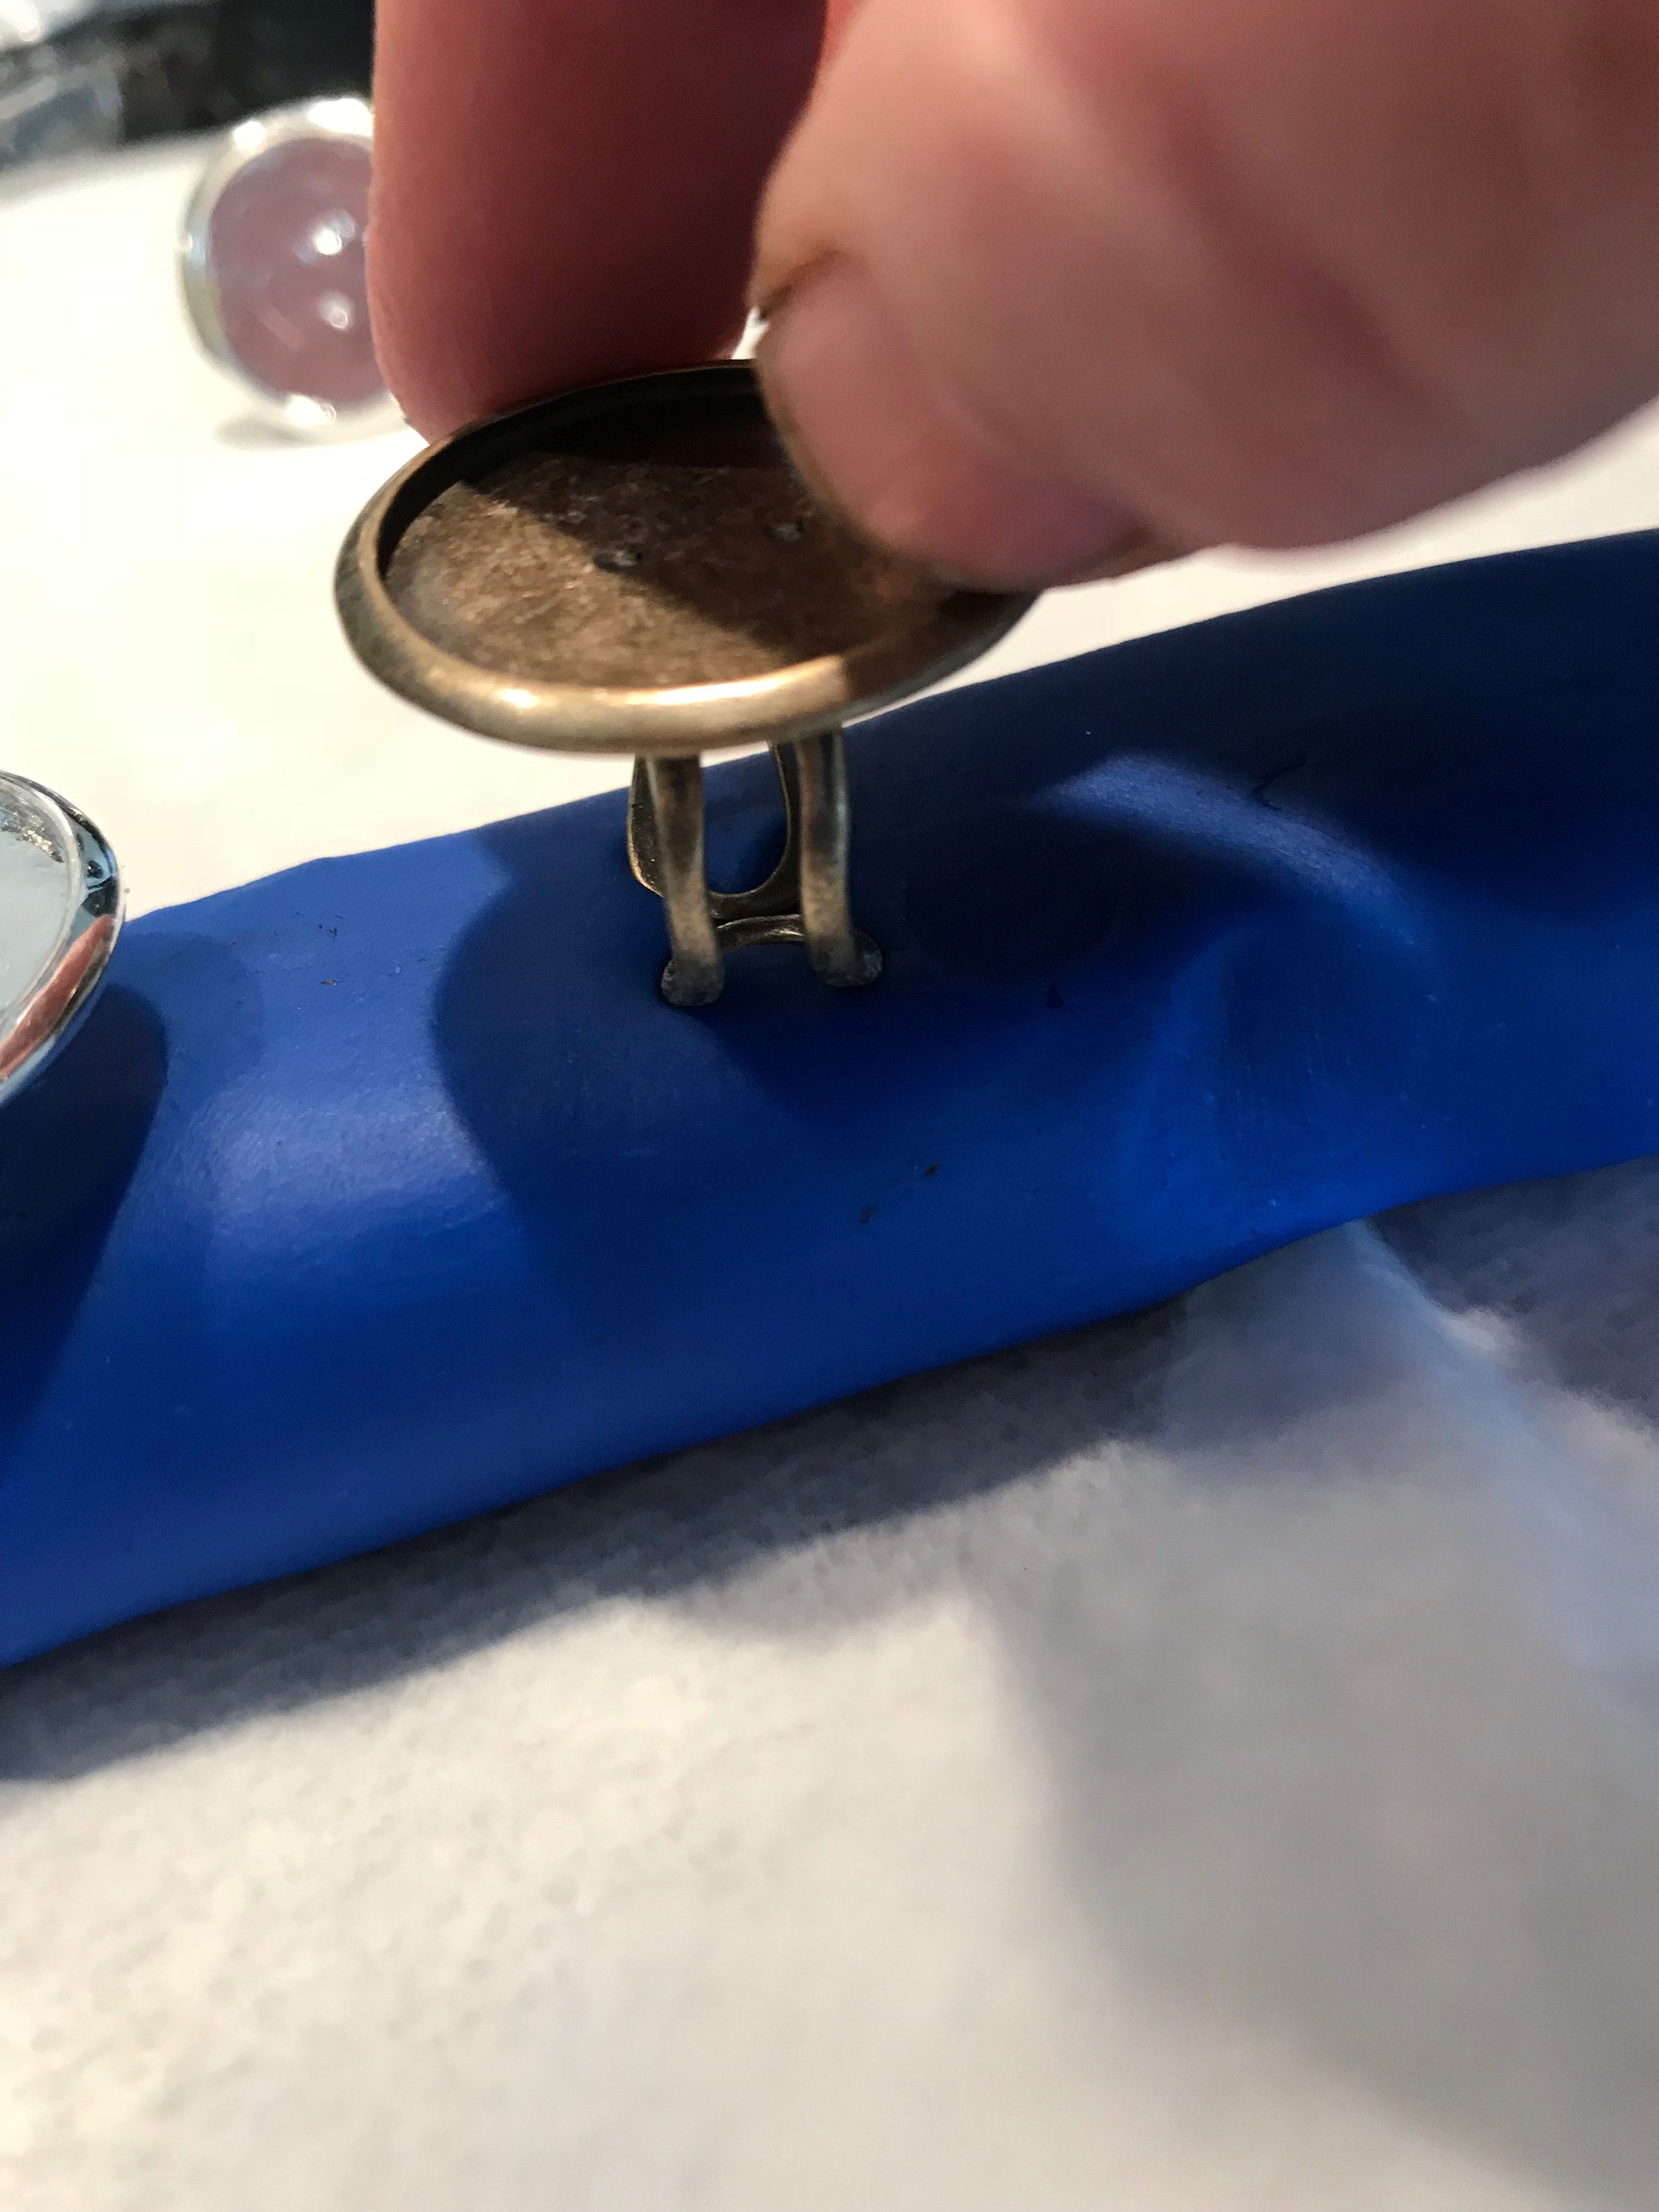 Placing ring in blue Play-Doh for stability